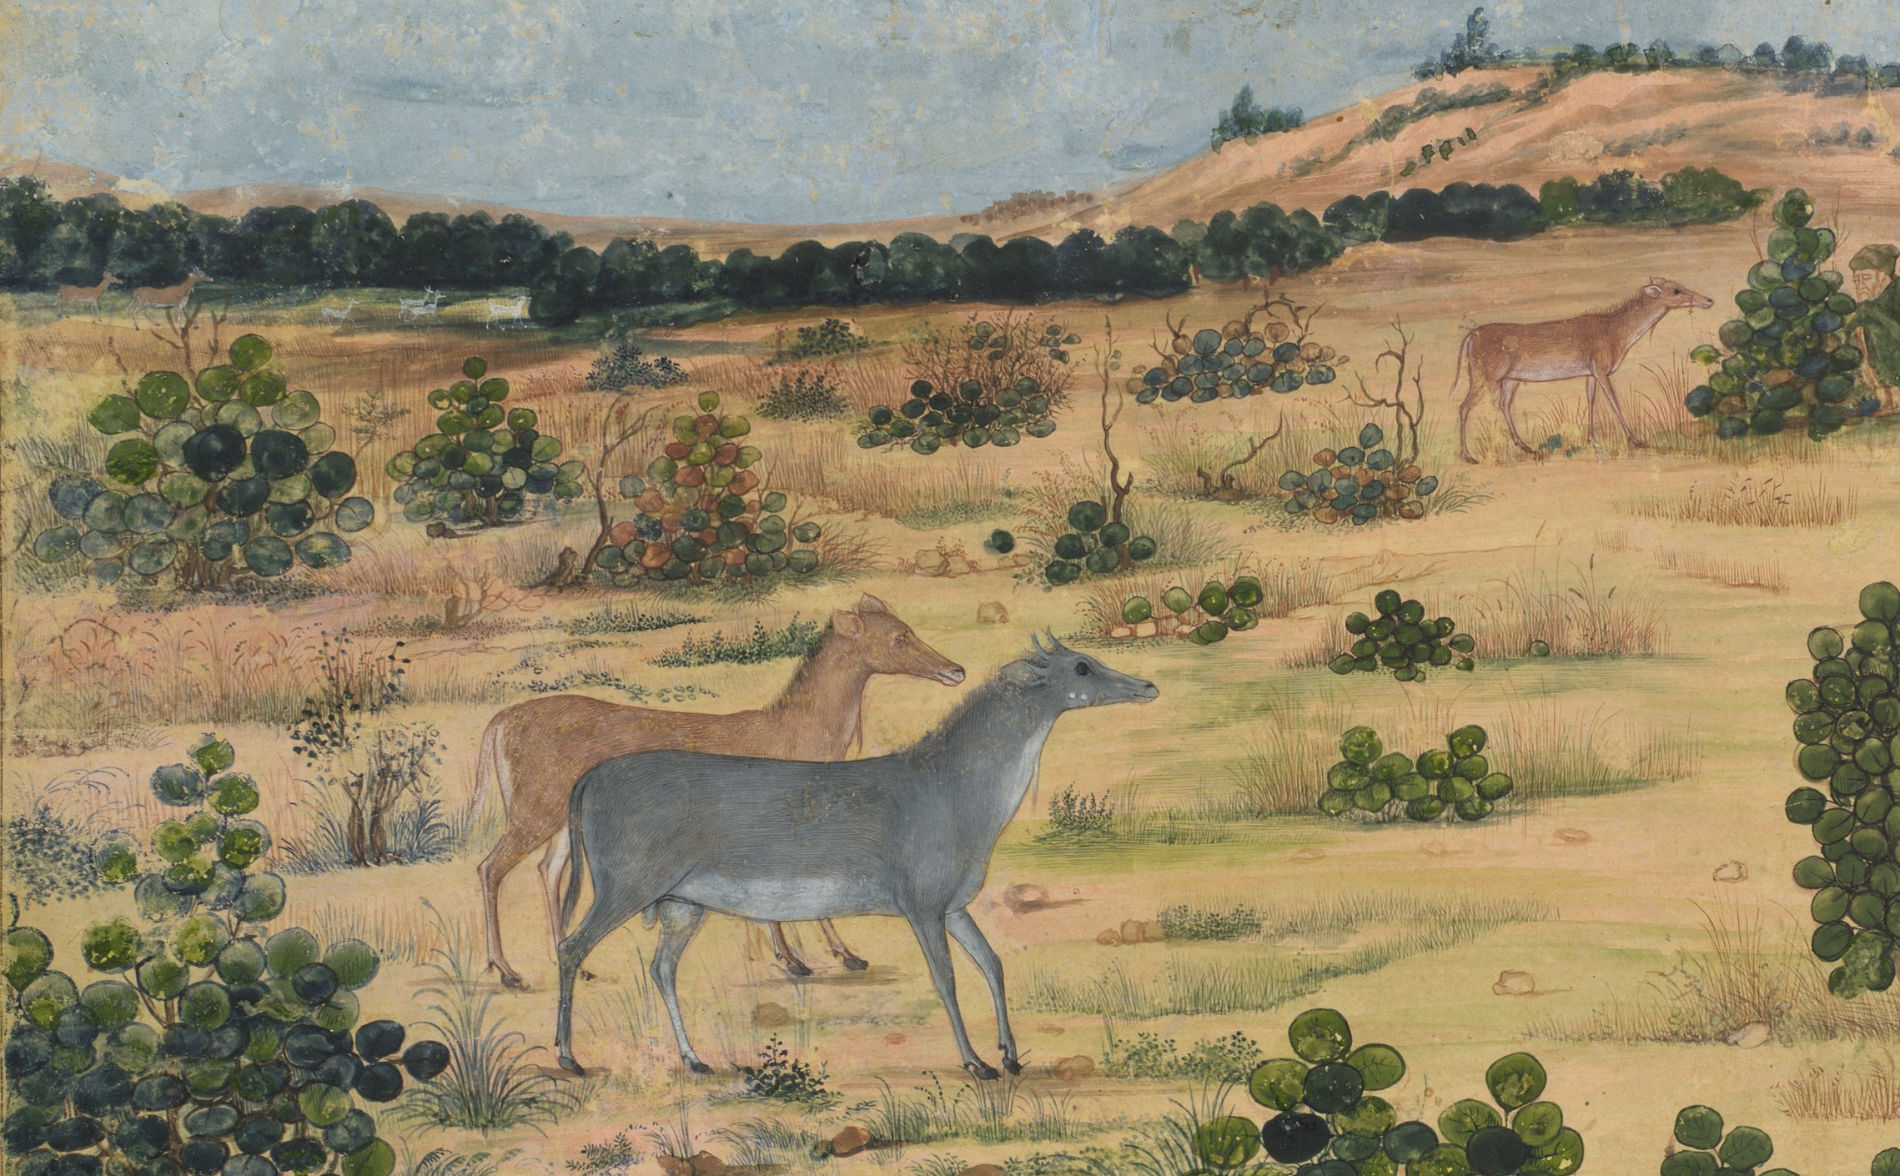 A detail from a landscape painting that shows several deer in the desert. The desert contains short tuffs of grass, leafless branches, and low lying circular bushes. 